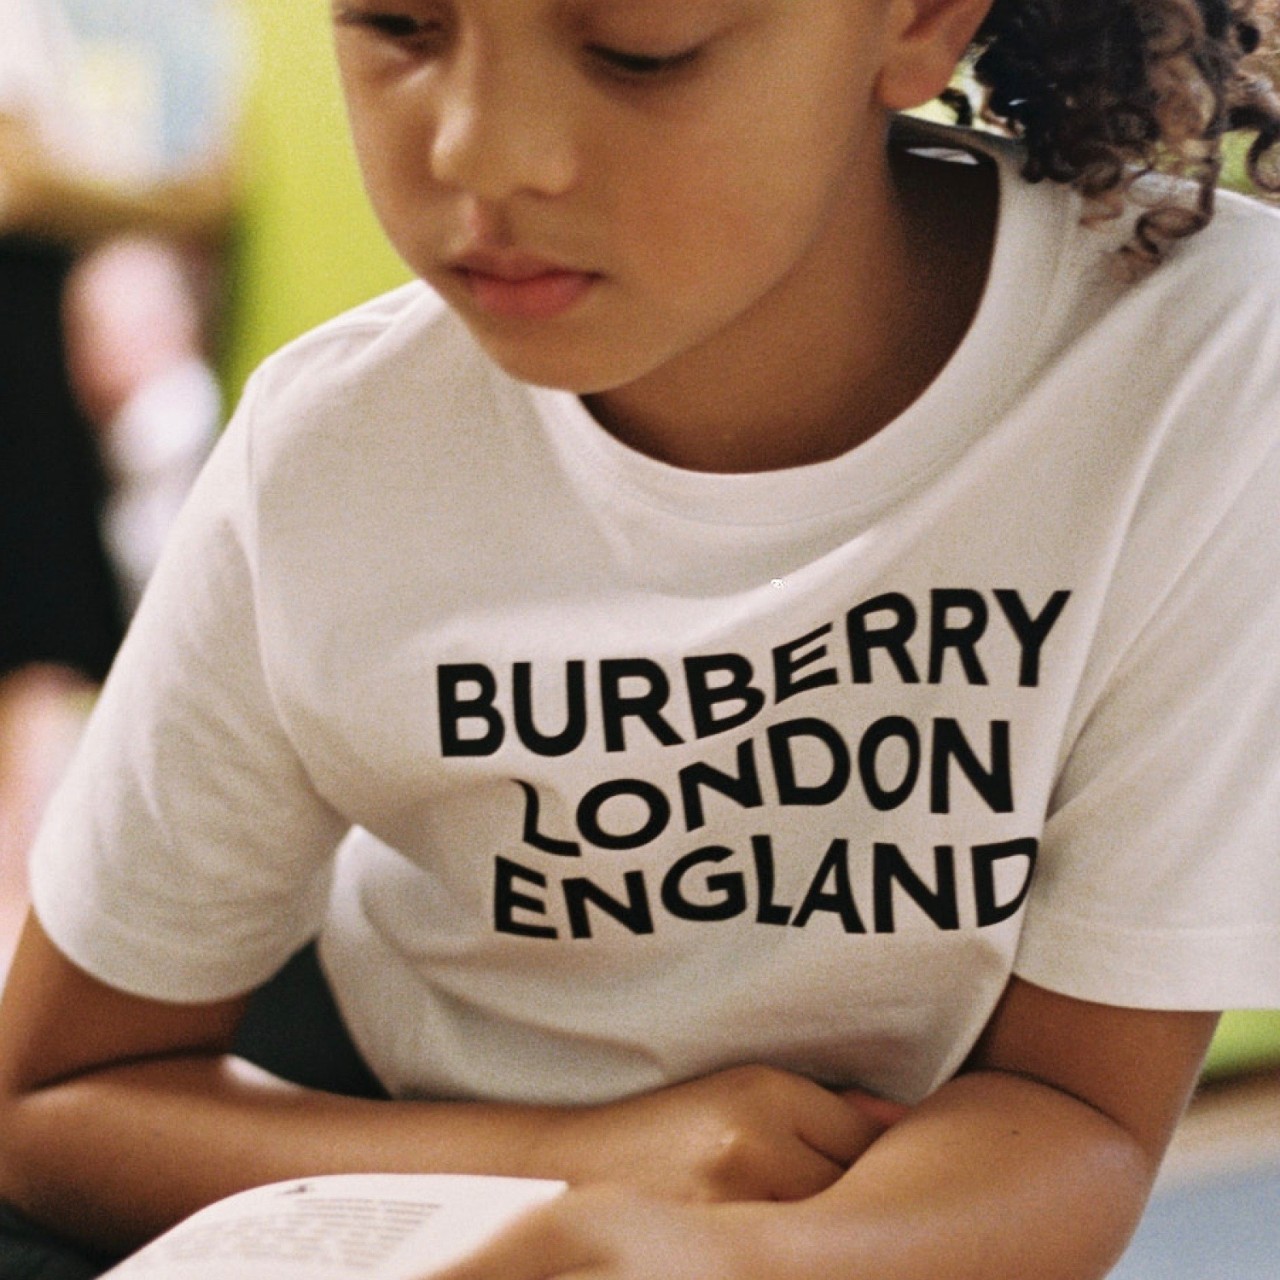 Burberry provides further skills and literacy support to young people to being the best place to for women in the luxury industry - Burberryplc